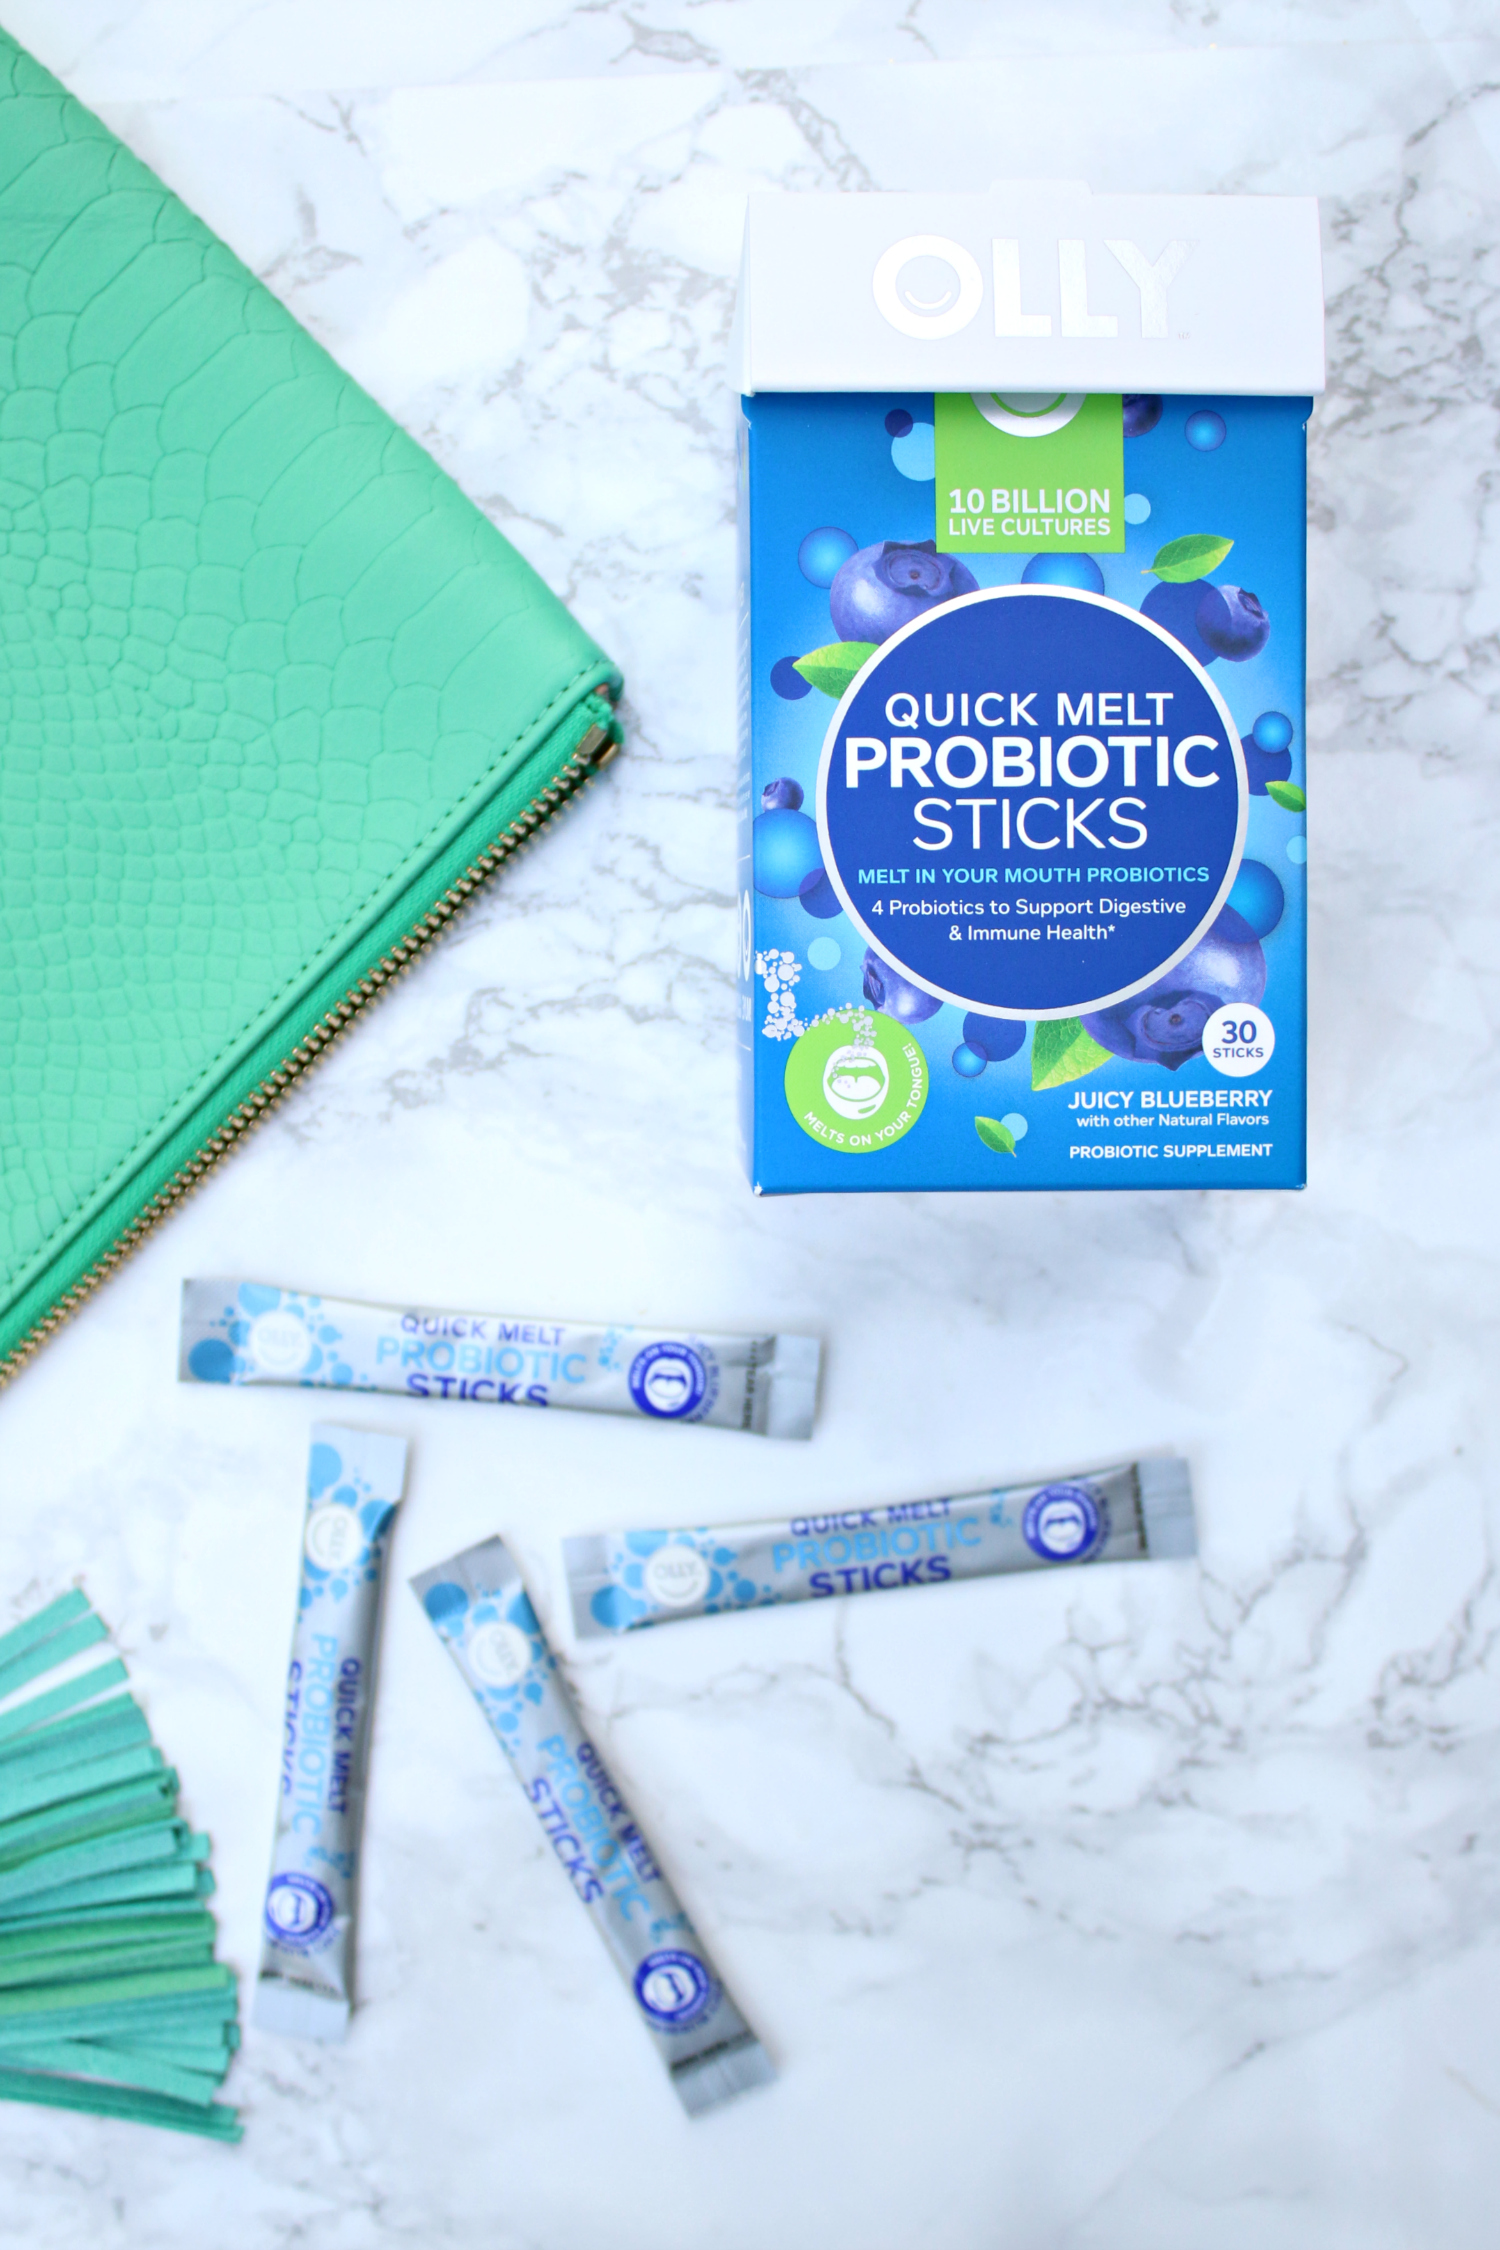 Olly Quick Melt Probiotic Sticks is one of the best beauty supplements for women